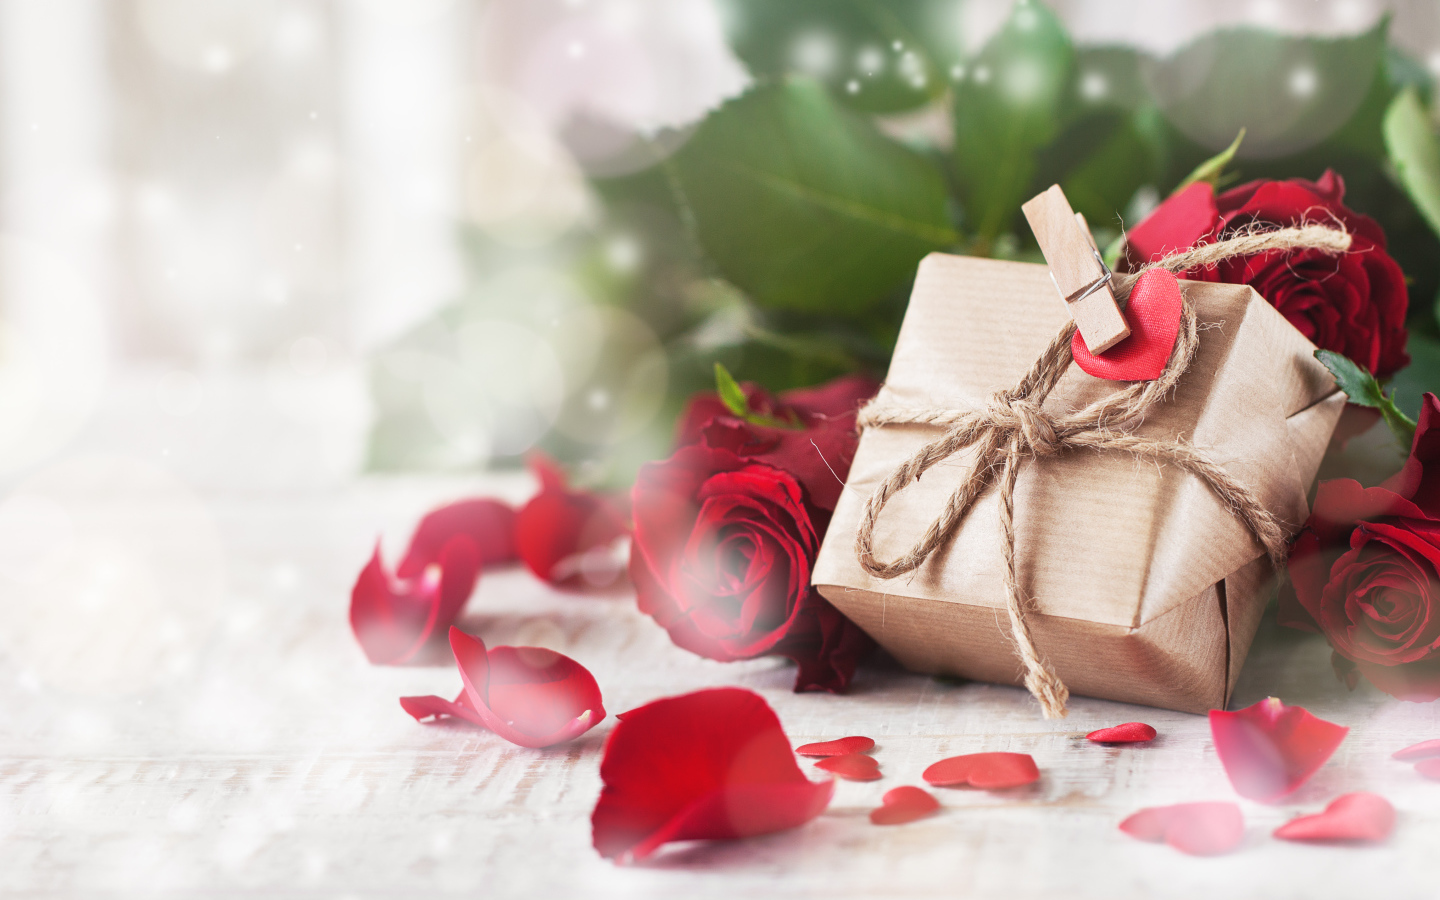 A gift in a box on a table with red roses